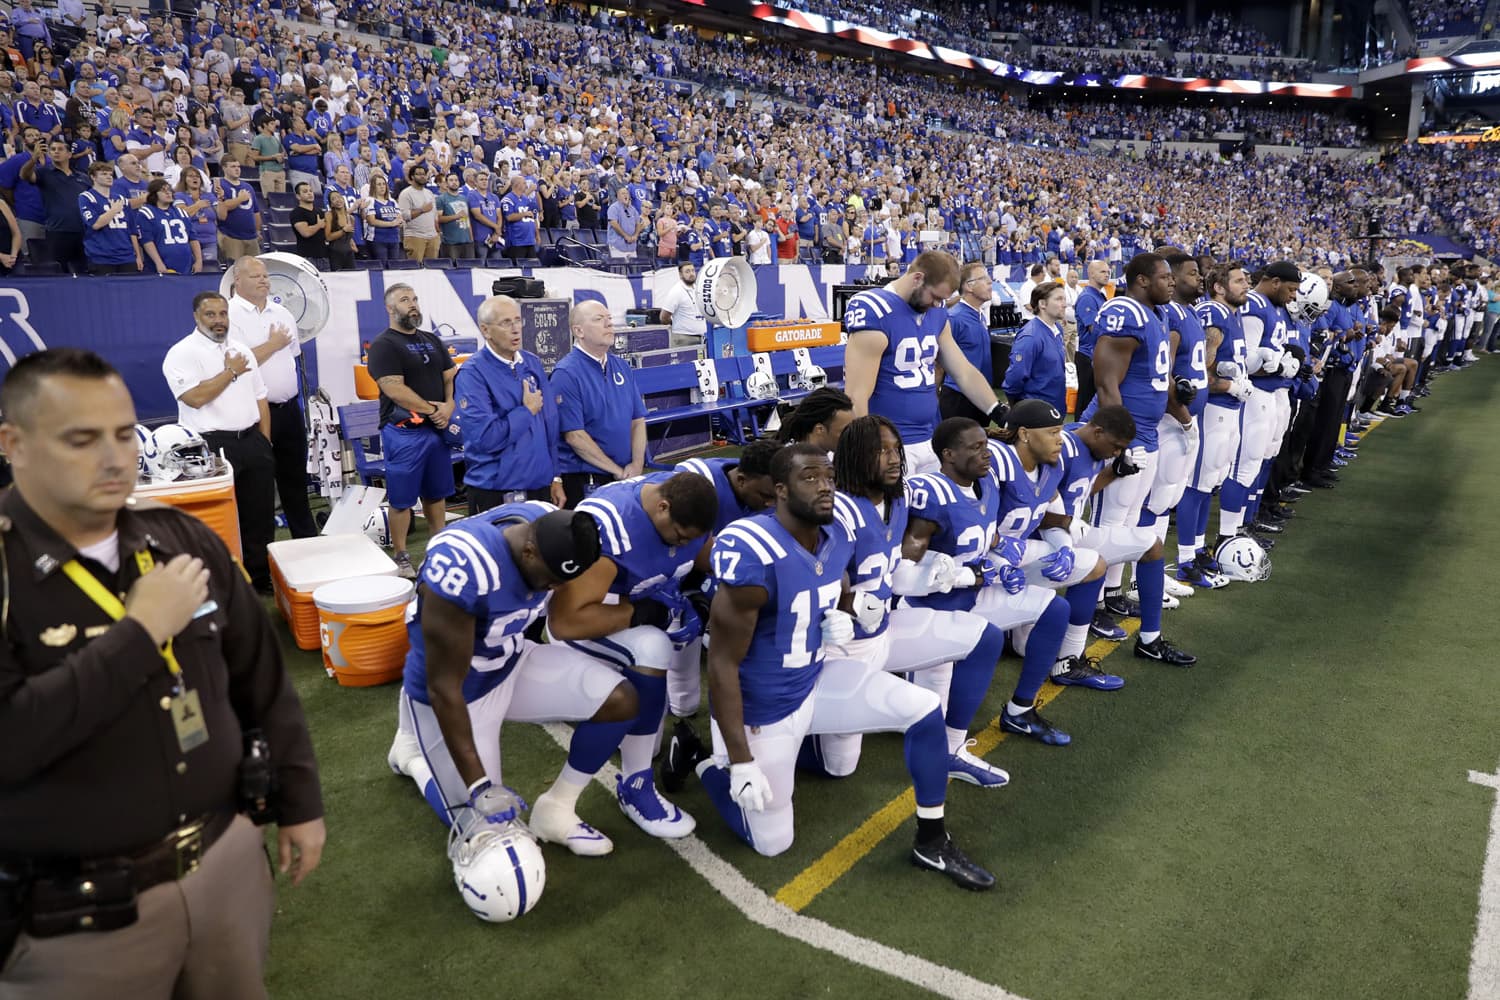 Members of the Indianapolis Colts take a knee during the nation anthem before an NFL football game against the Cleveland Browns in Indianapolis, Sunday, Sept. 24, 2017. (Darron Cummings/AP)